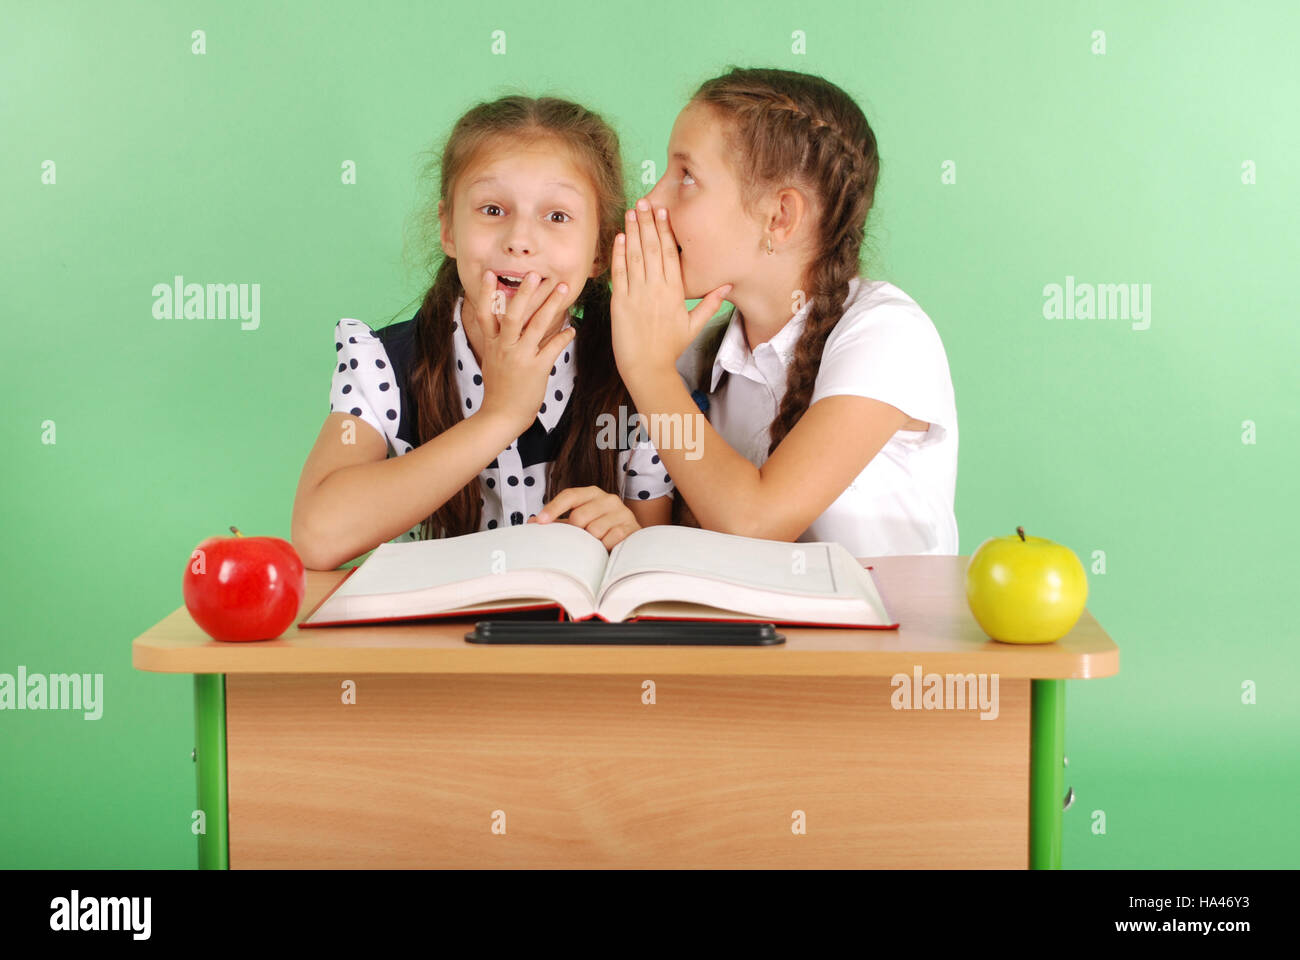 Two school girl sharing secrets  sitting at a desk from book isolated on green Stock Photo